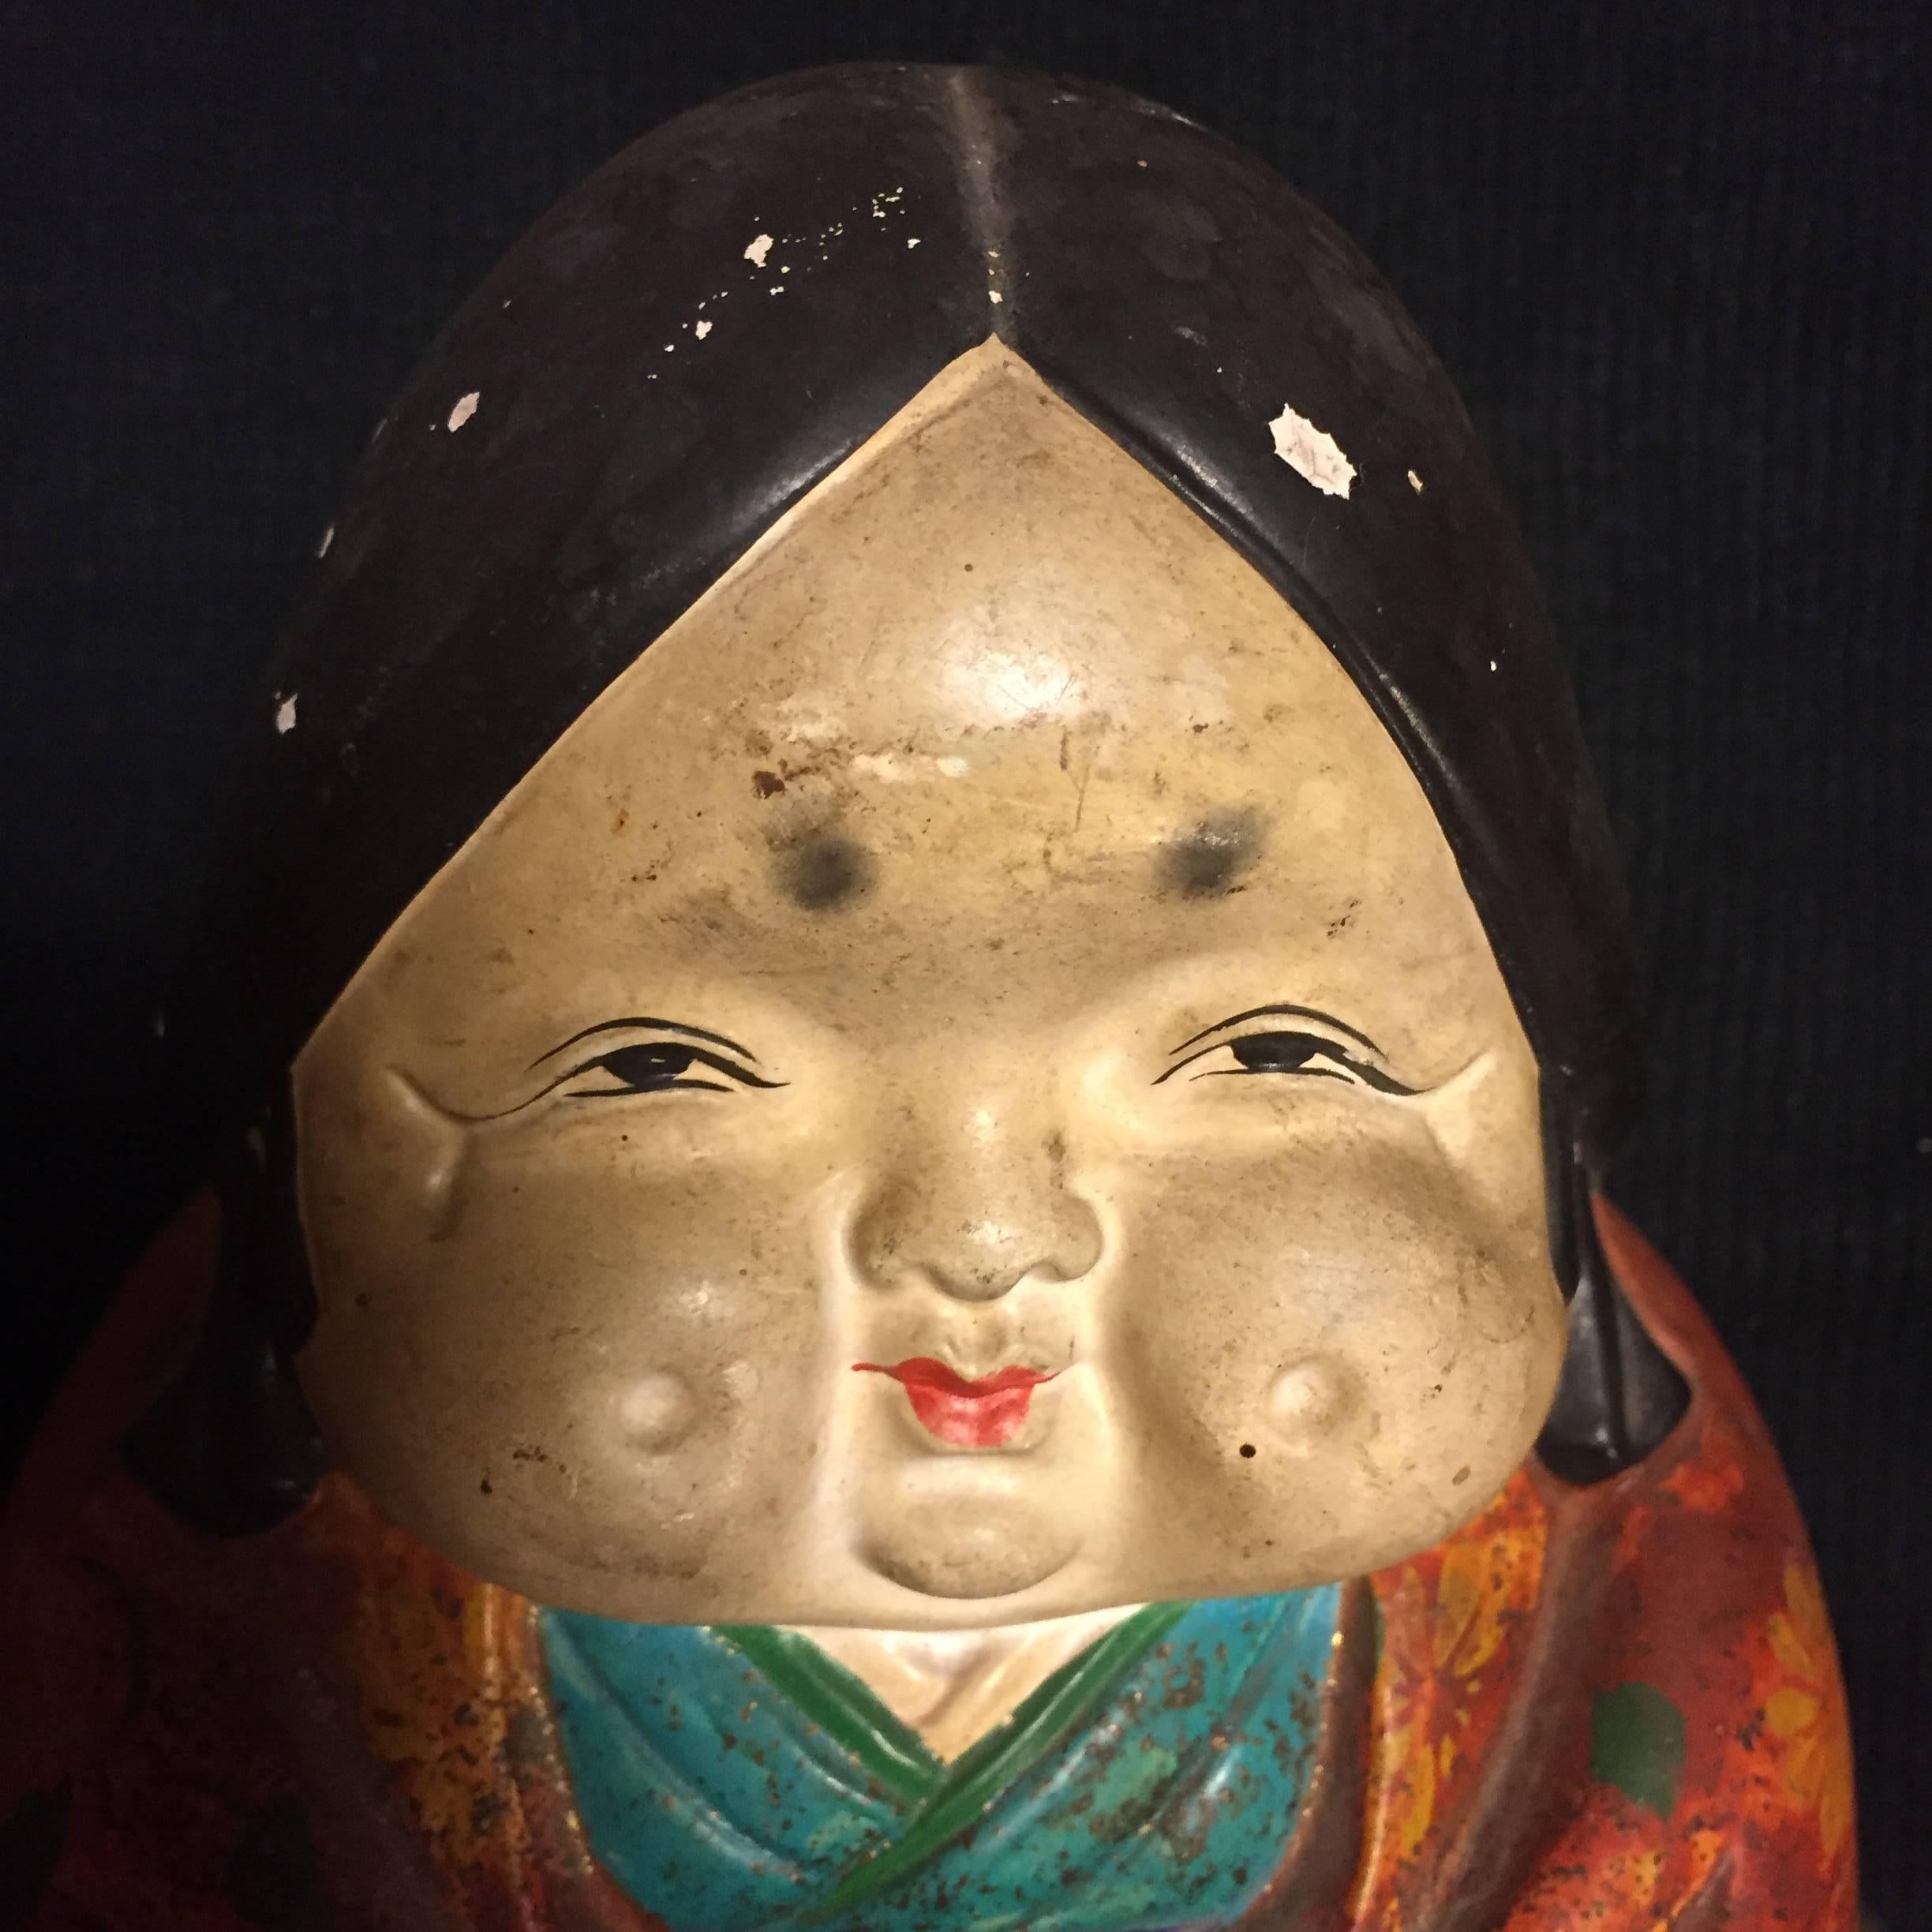 Japanese Ceramic Doll Okame, Hand-Painted Gem from Early 20th Century 1